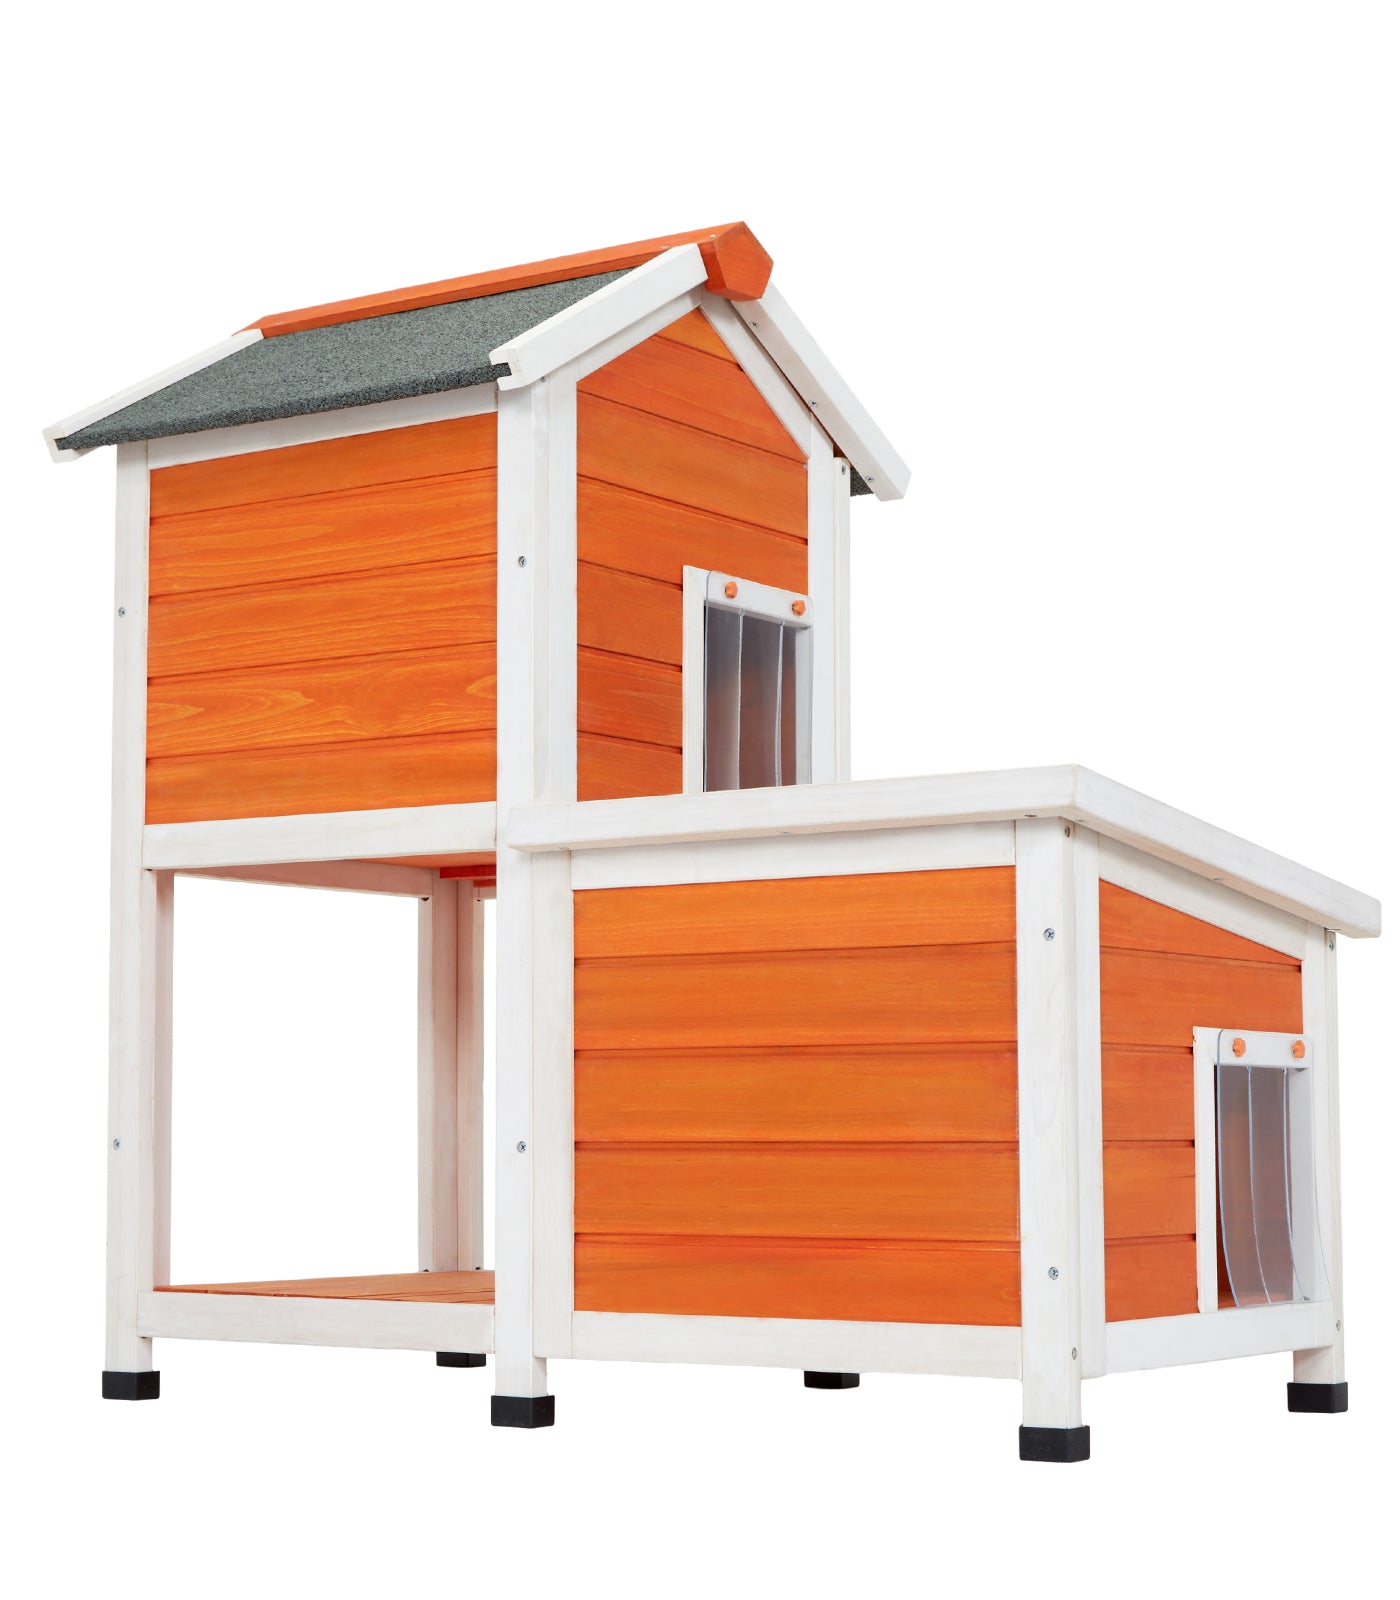 petsfit-2-stroy-cat-house-outdoor-insulated-high-feet-feeding-station-door-curtain-wood-outside-cat-house-bunny-rabbit-hutch-orange-03